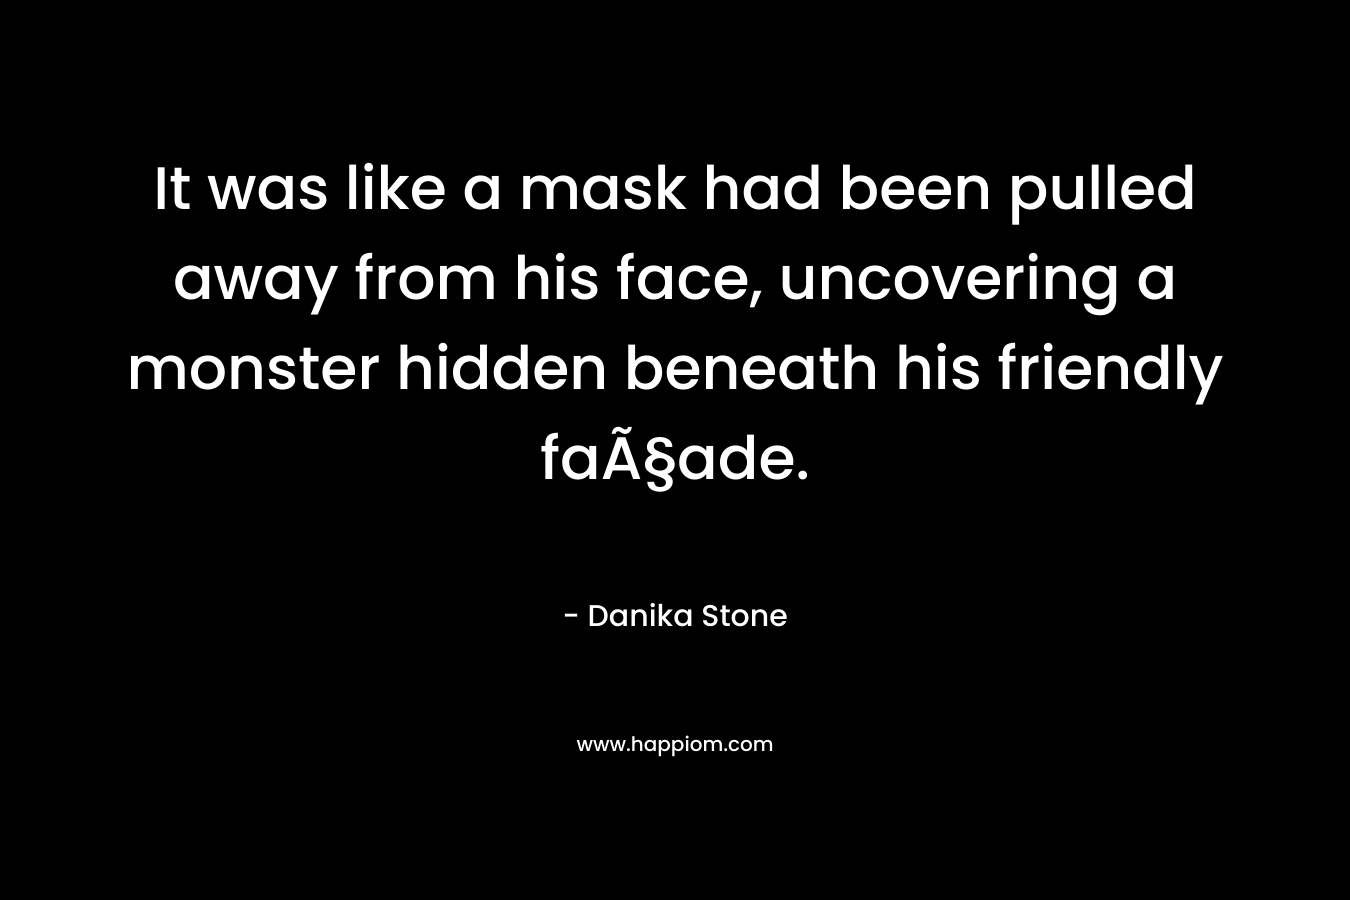 It was like a mask had been pulled away from his face, uncovering a monster hidden beneath his friendly faÃ§ade. – Danika Stone